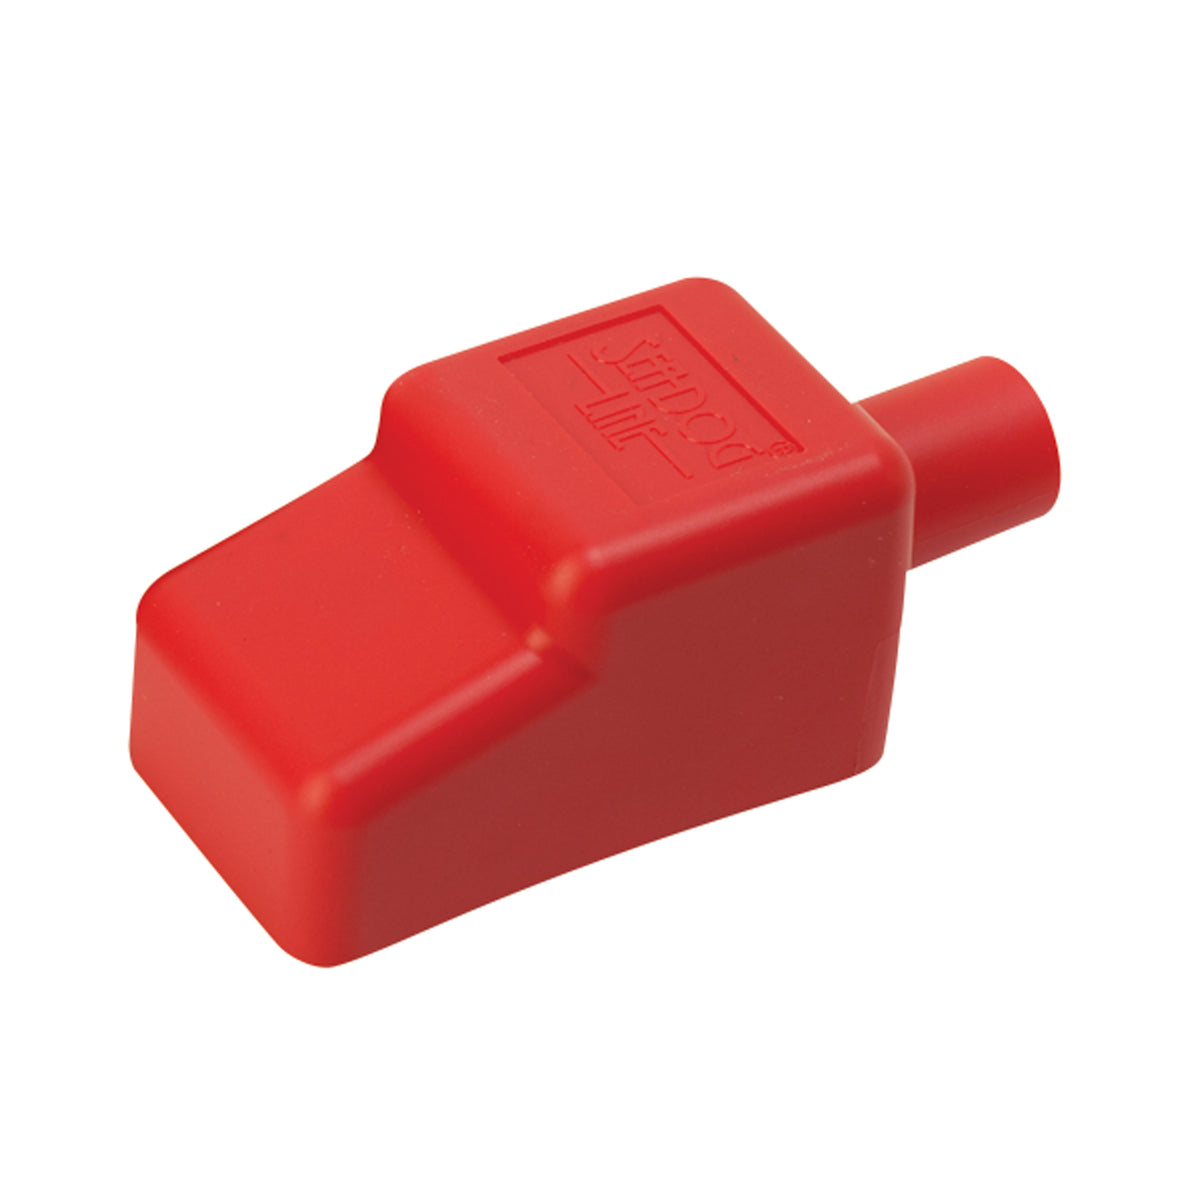 Sea-Dog 415116 5/8" Battery Terminal Cover - Red